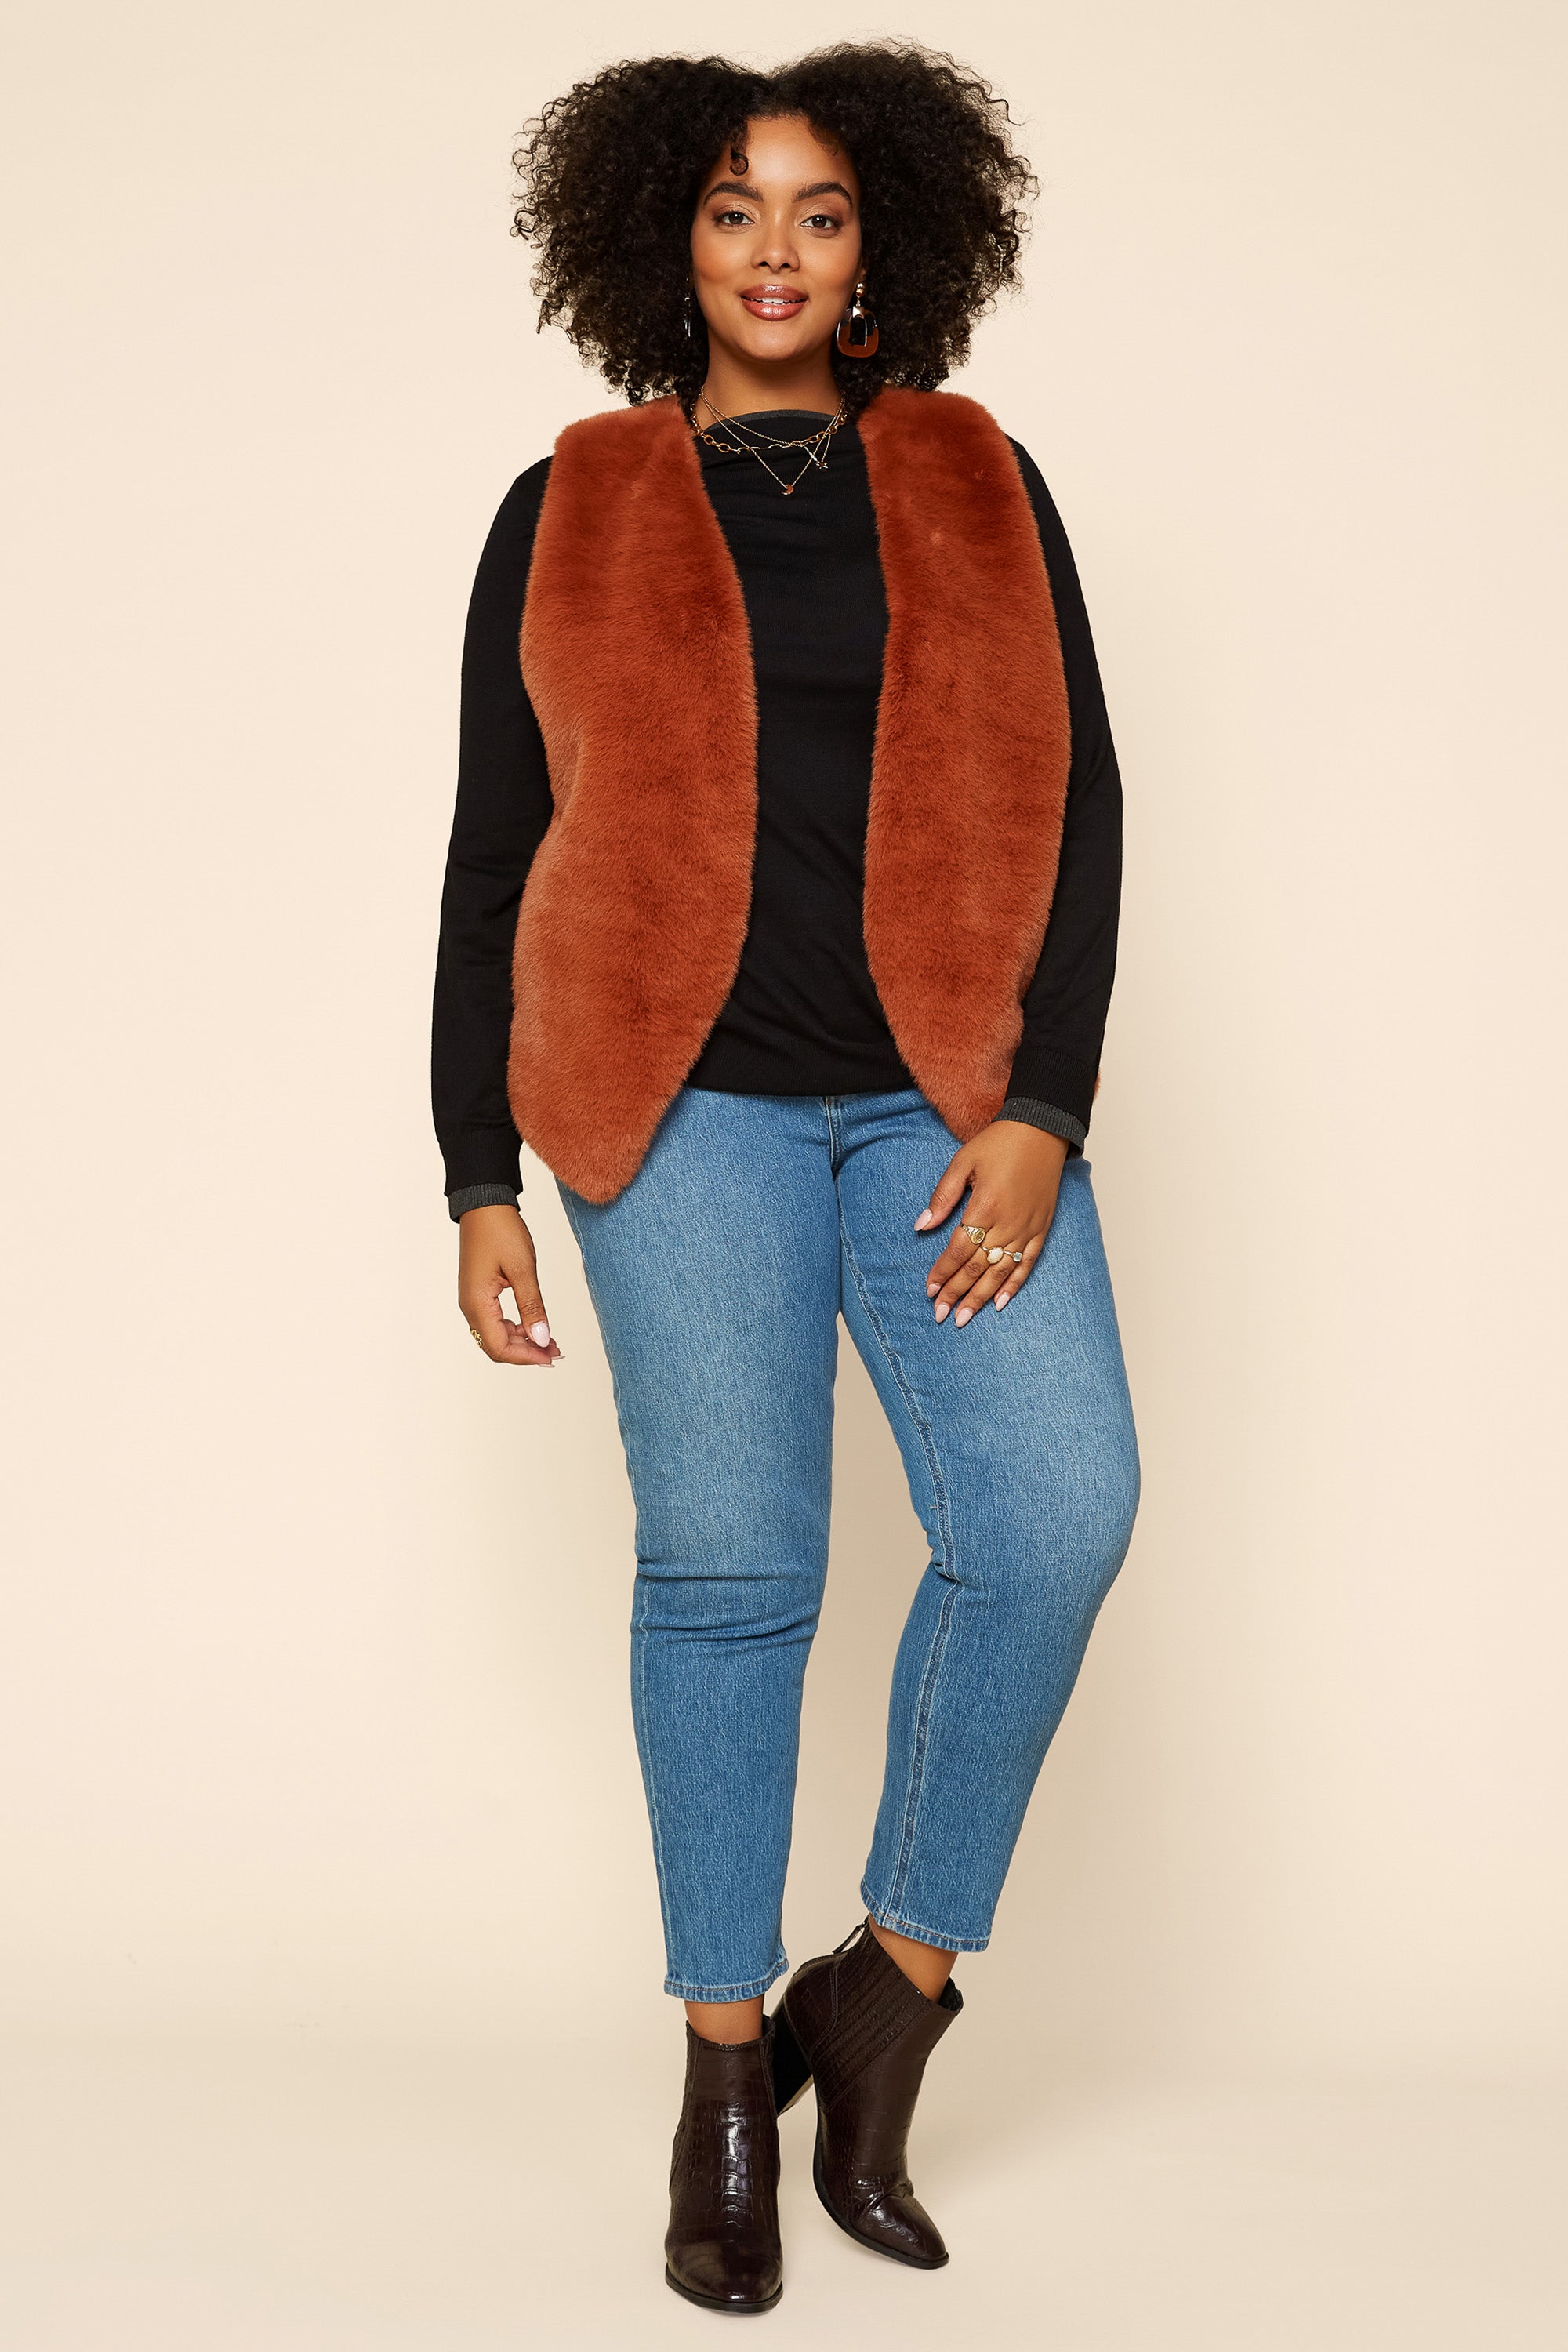 Plus Fur with Pocket – ARE BLUE